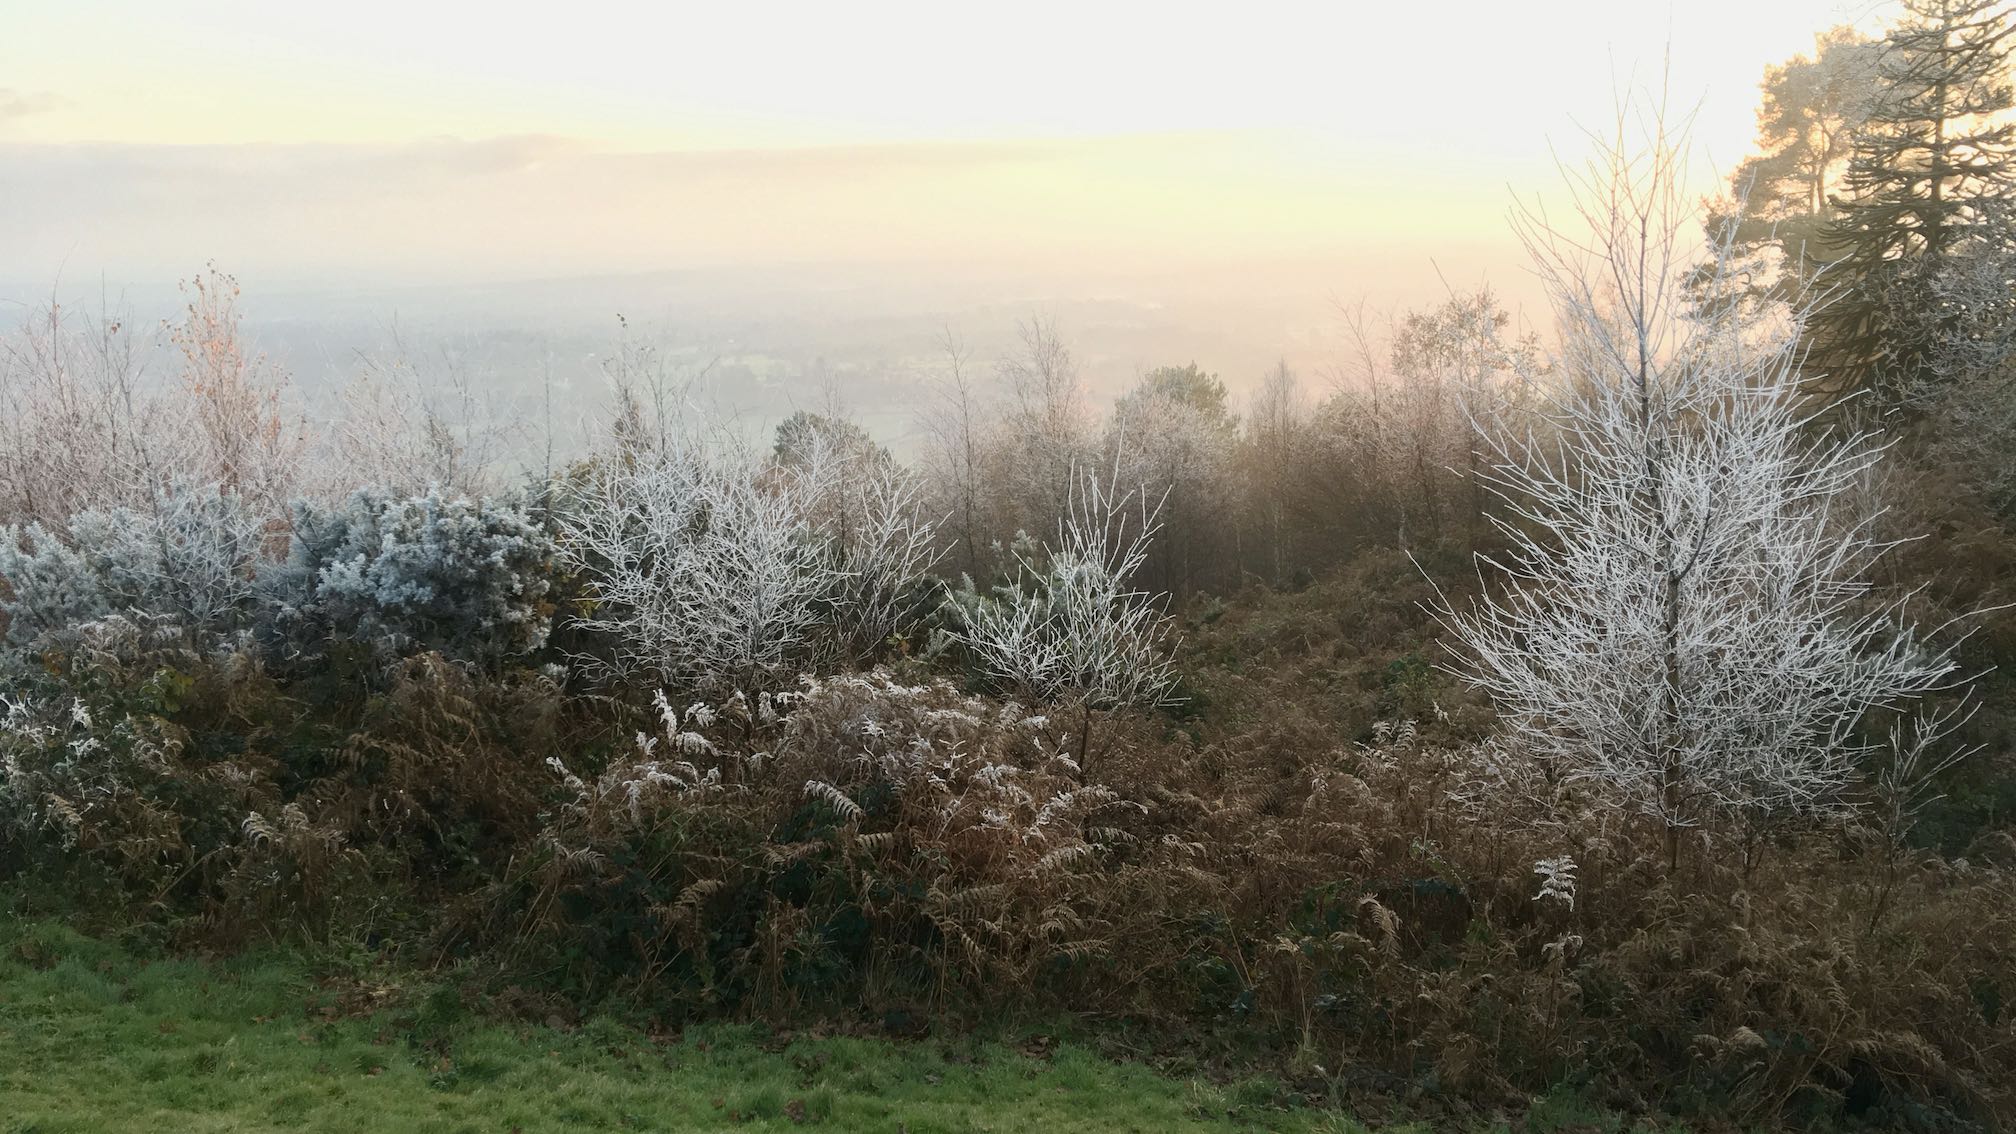 Photo of frosted trees in bracken with a very misty sunset view beyond